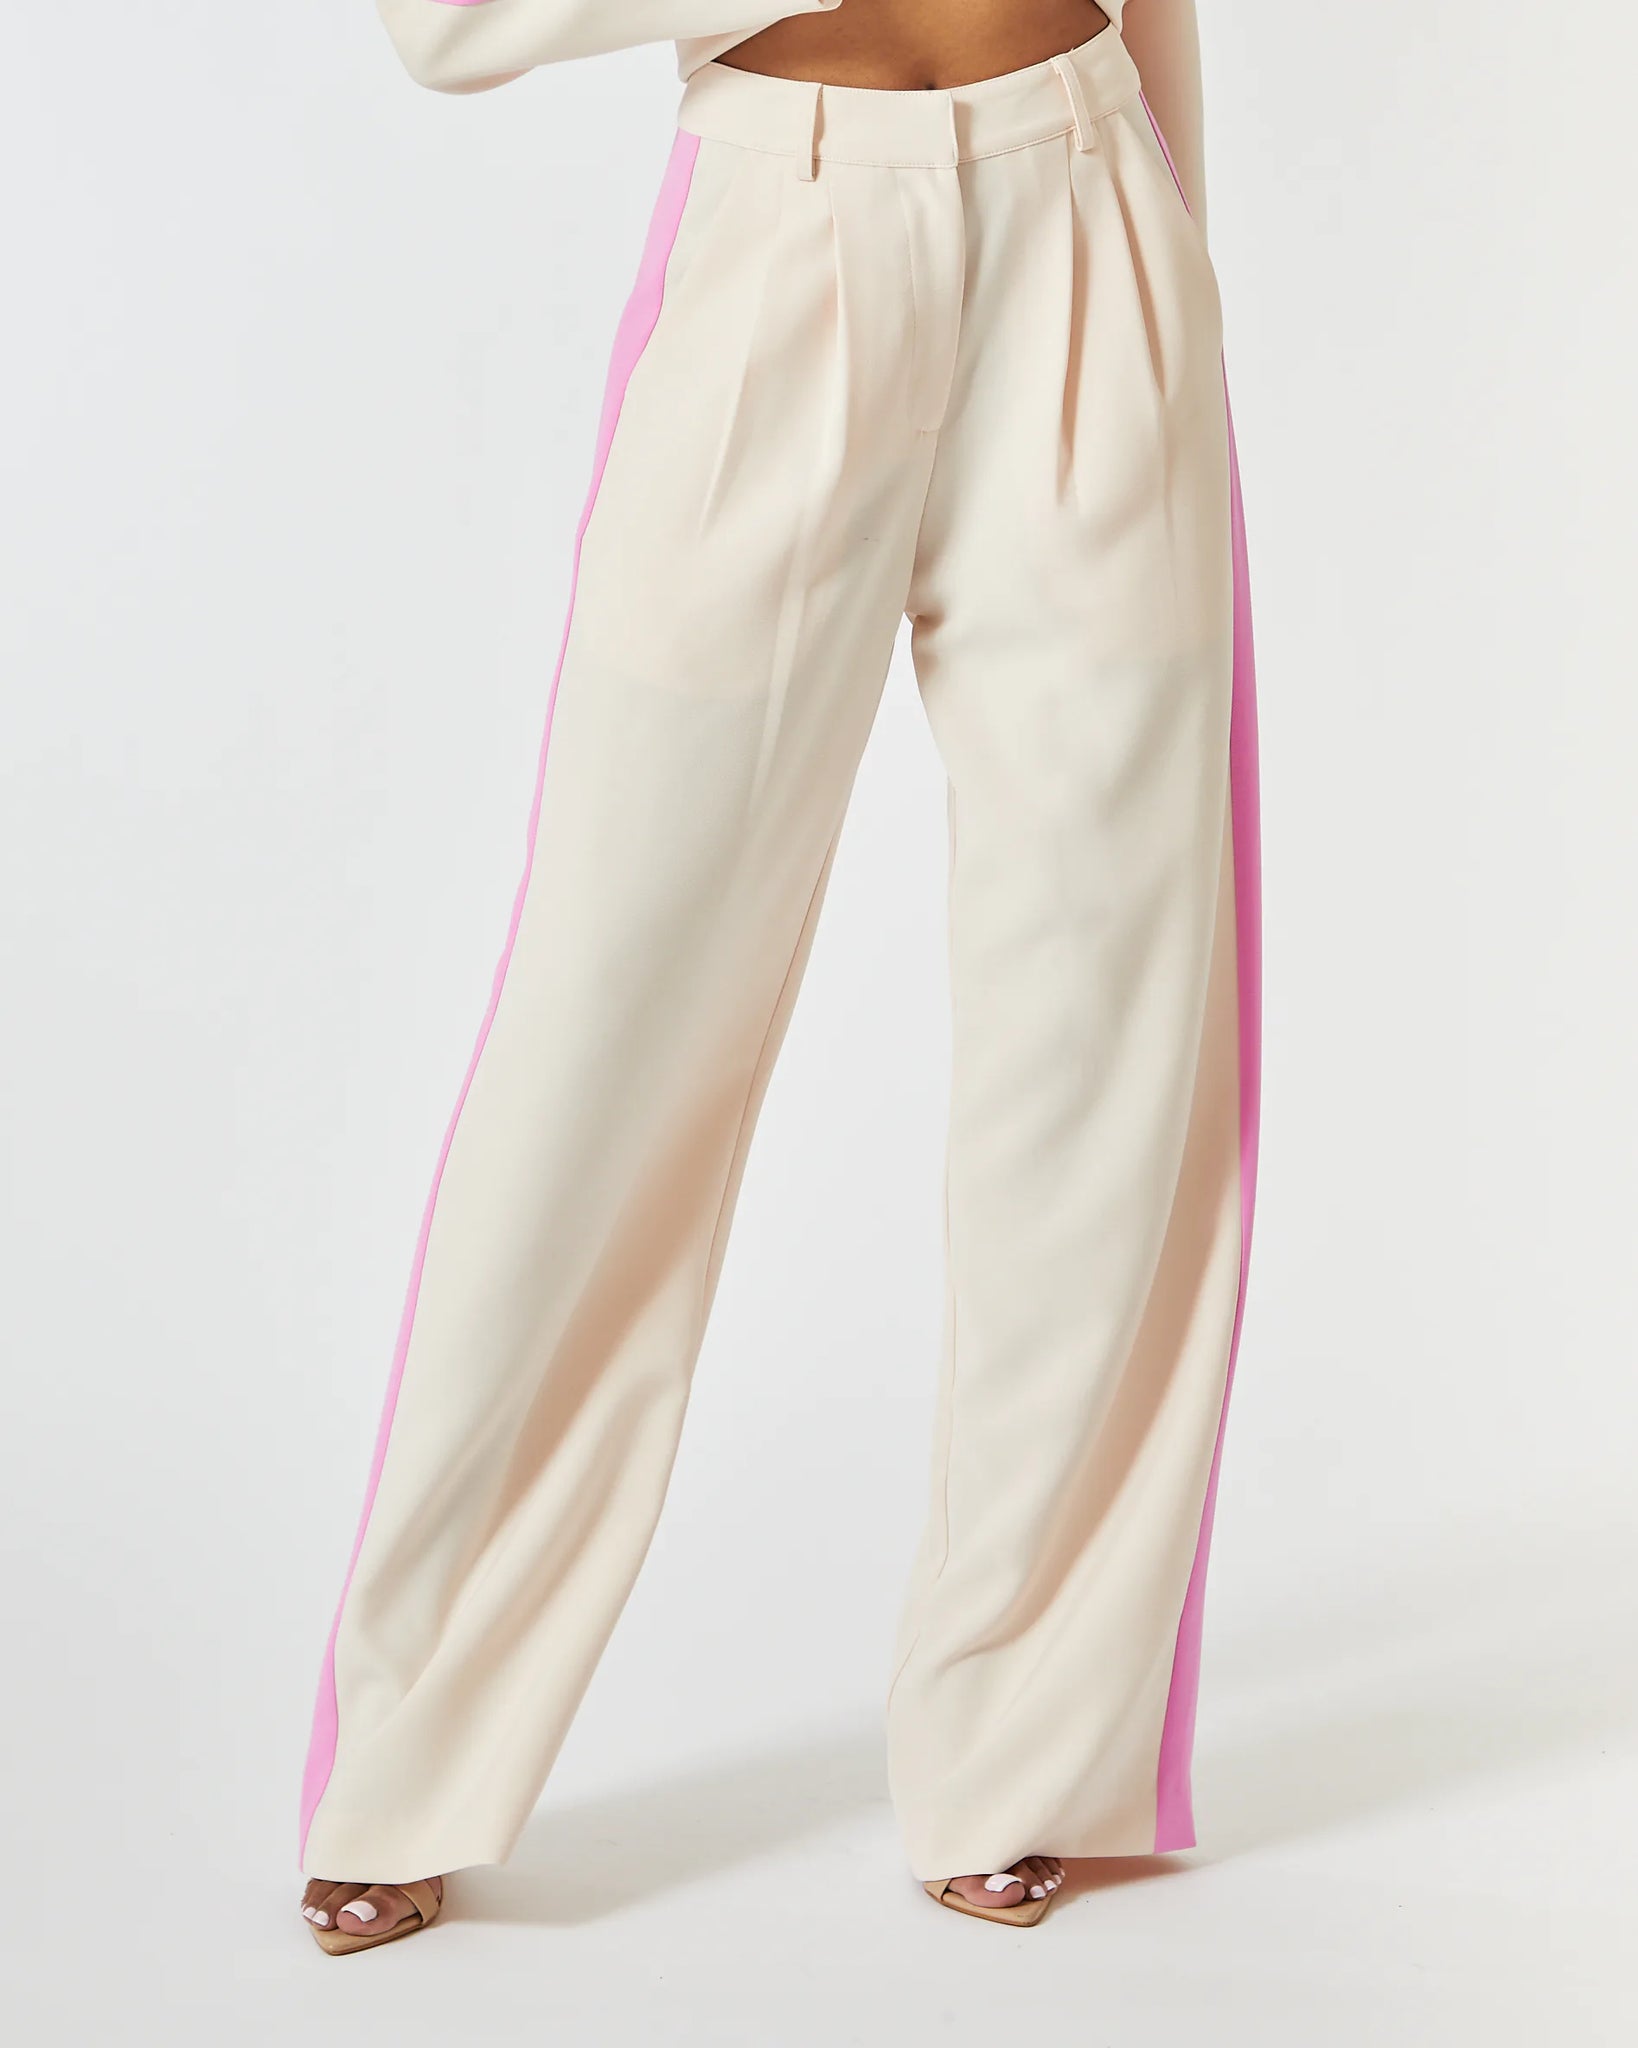 CREAM AND PINK WIDE LEG RELAXED FIT TROUSER WITH CONTRAST SIDE STRIPE – Arelia's  Dream